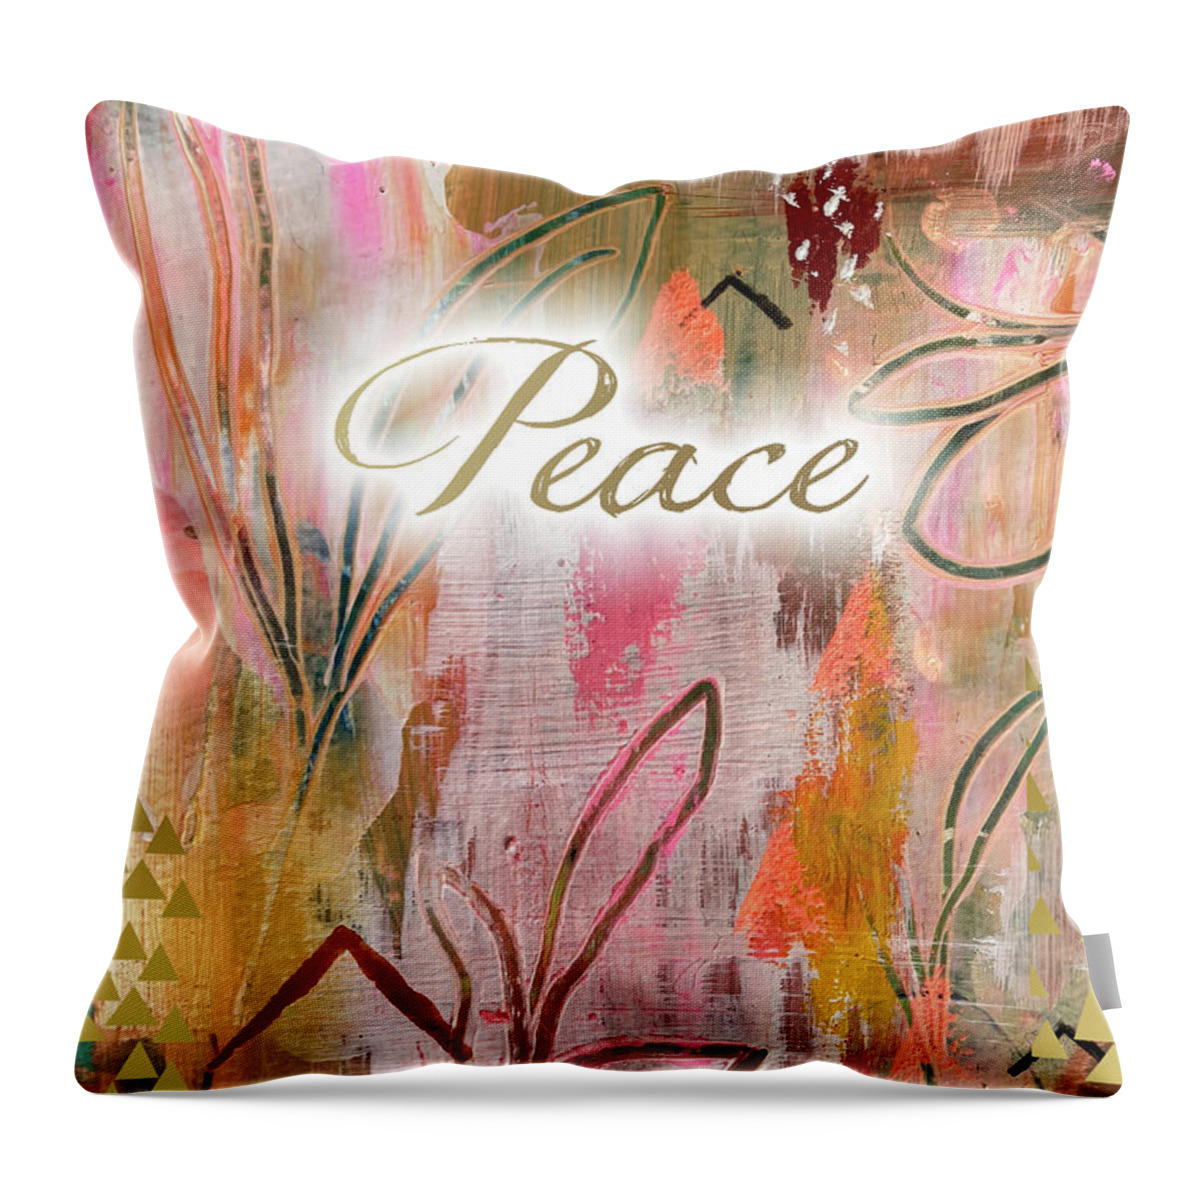 Peace Throw Pillow featuring the mixed media Peace by Claudia Schoen